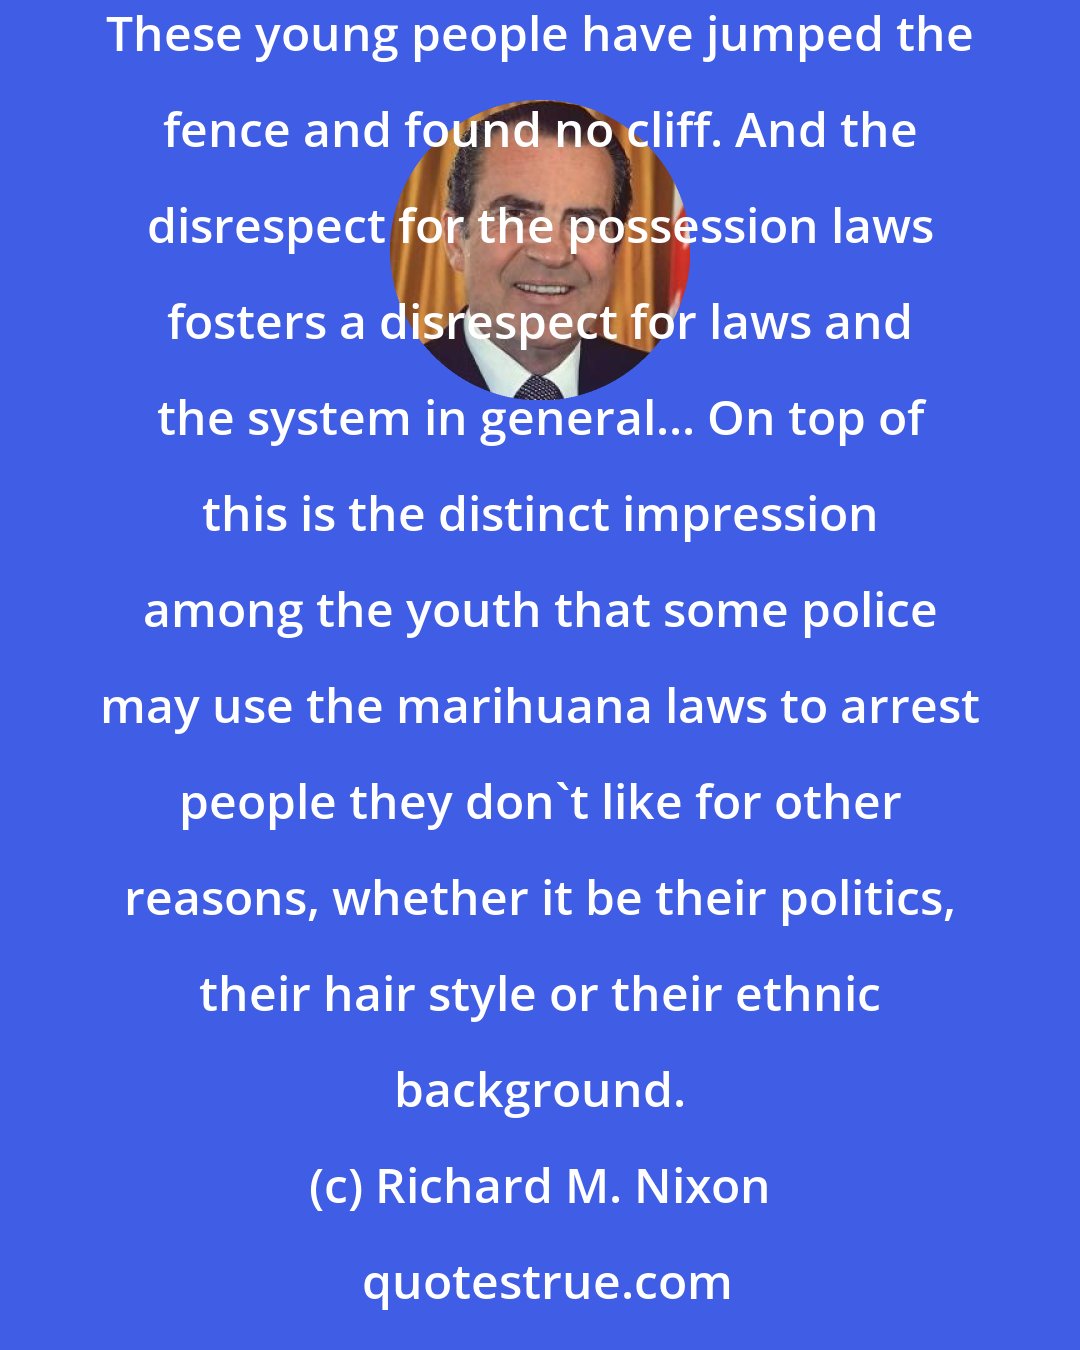 Richard M. Nixon: Our youth can not understand why society chooses to criminalize a behavior with so little visible ill effect or adverse social impact... These young people have jumped the fence and found no cliff. And the disrespect for the possession laws fosters a disrespect for laws and the system in general... On top of this is the distinct impression among the youth that some police may use the marihuana laws to arrest people they don't like for other reasons, whether it be their politics, their hair style or their ethnic background.